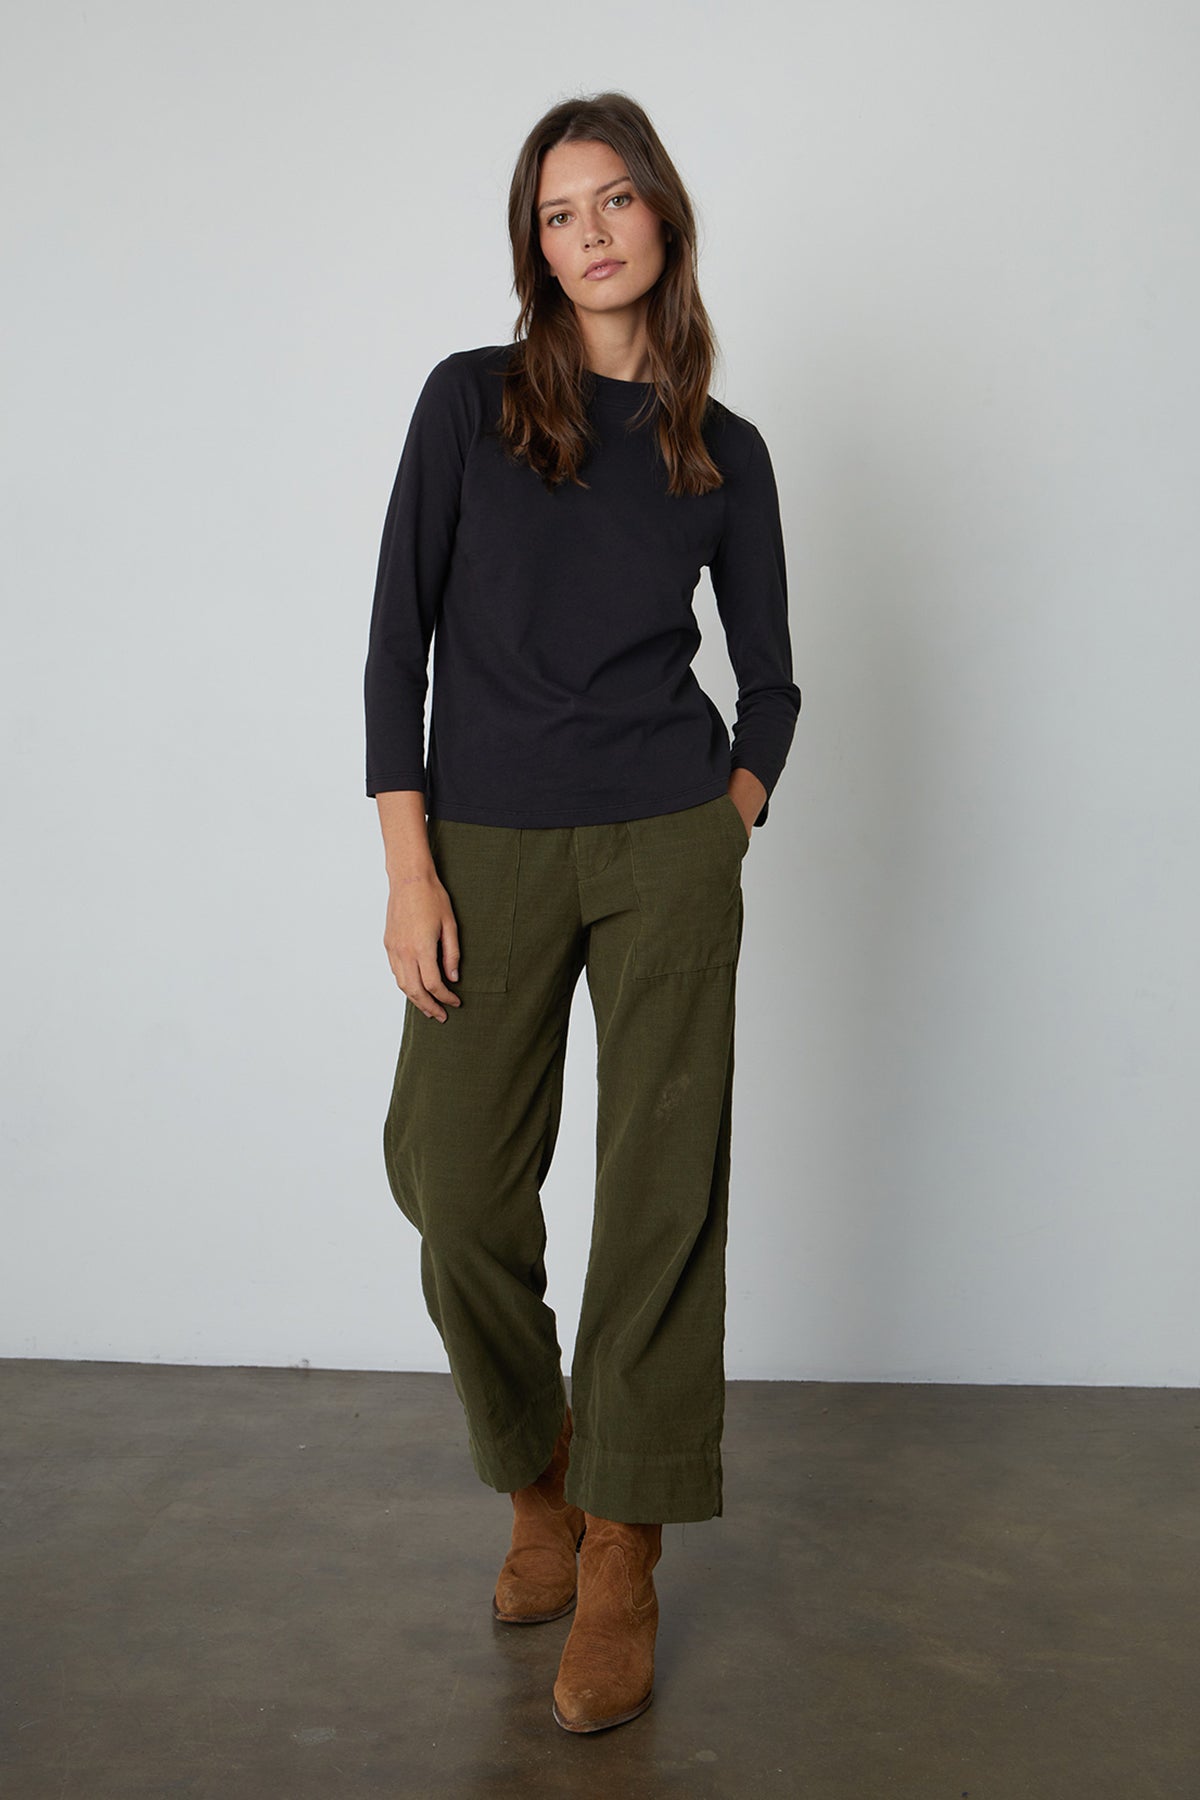   Vera Corduroy Wide Leg Pant in dark green dillweed with Quinny Tee in black front 